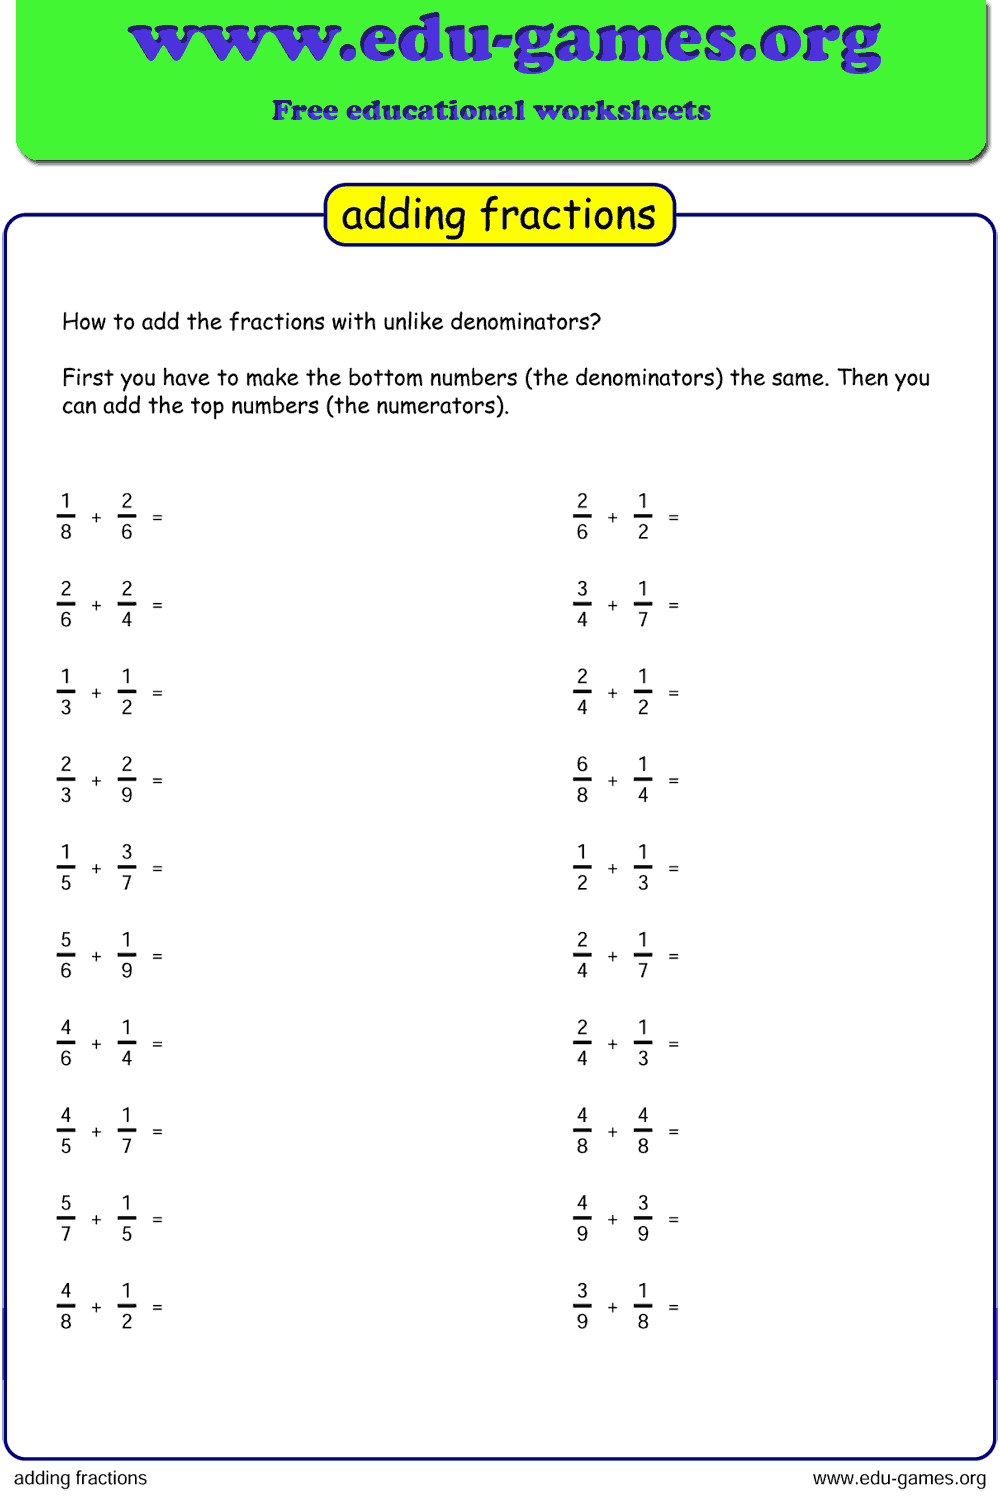 addition-of-fractions-with-unlike-denominators-worksheets